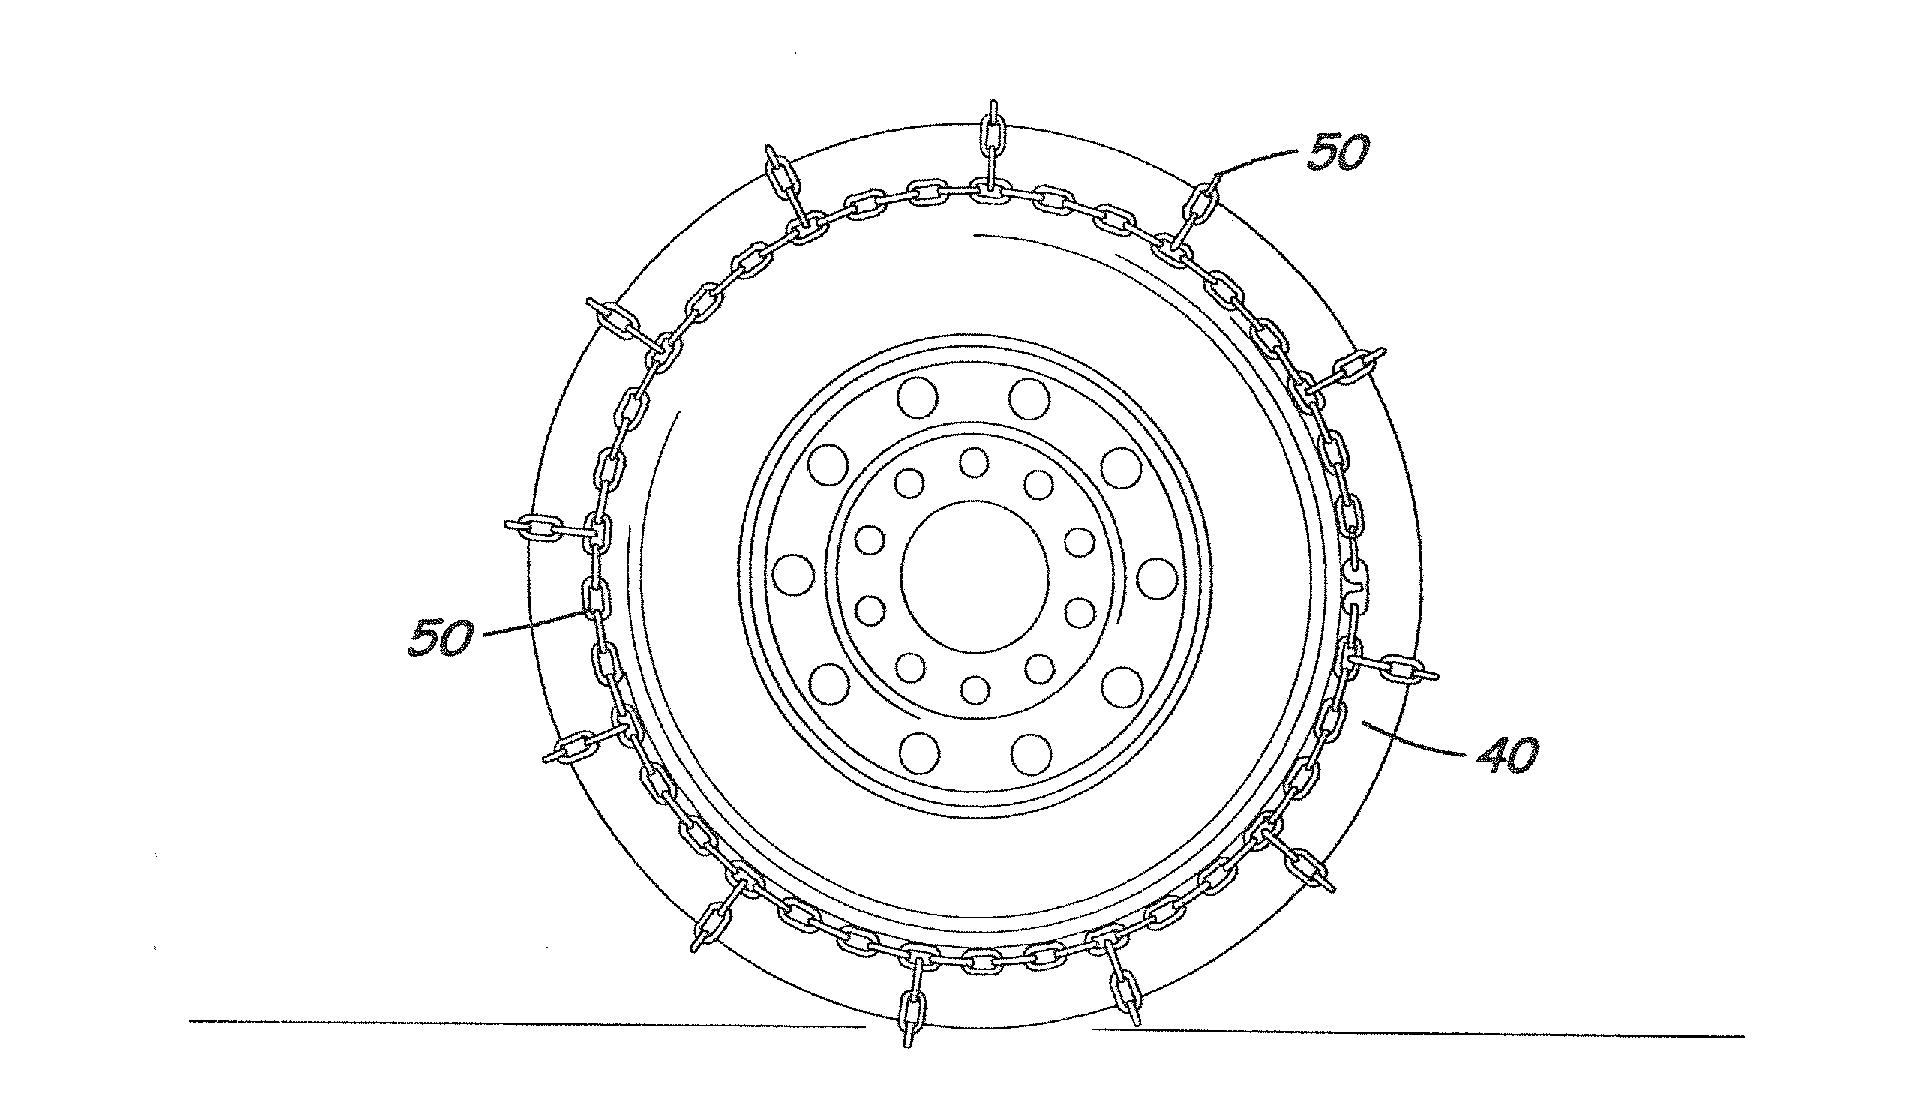 Tool and method for tire traction device installation